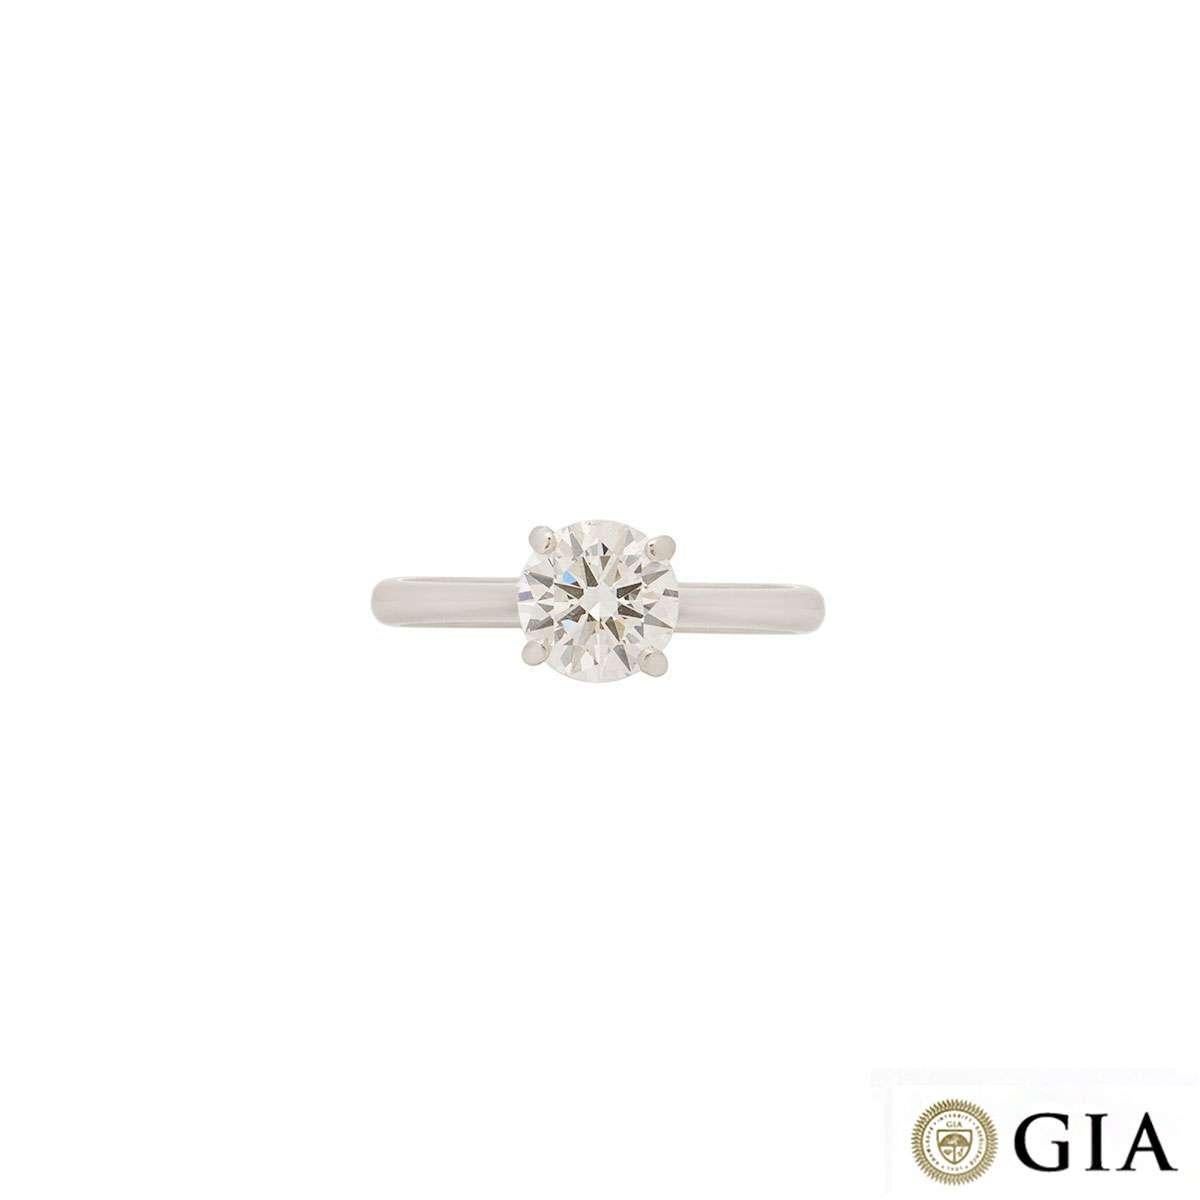 A stunning platinum diamond solitaire engagement ring. The ring comprises of a round brilliant cut diamond in a four claw setting with a weight of 1.23ct, F colour and SI1 in clarity. The ring is currently a size UK L, EU 51 and US 5¾ but can